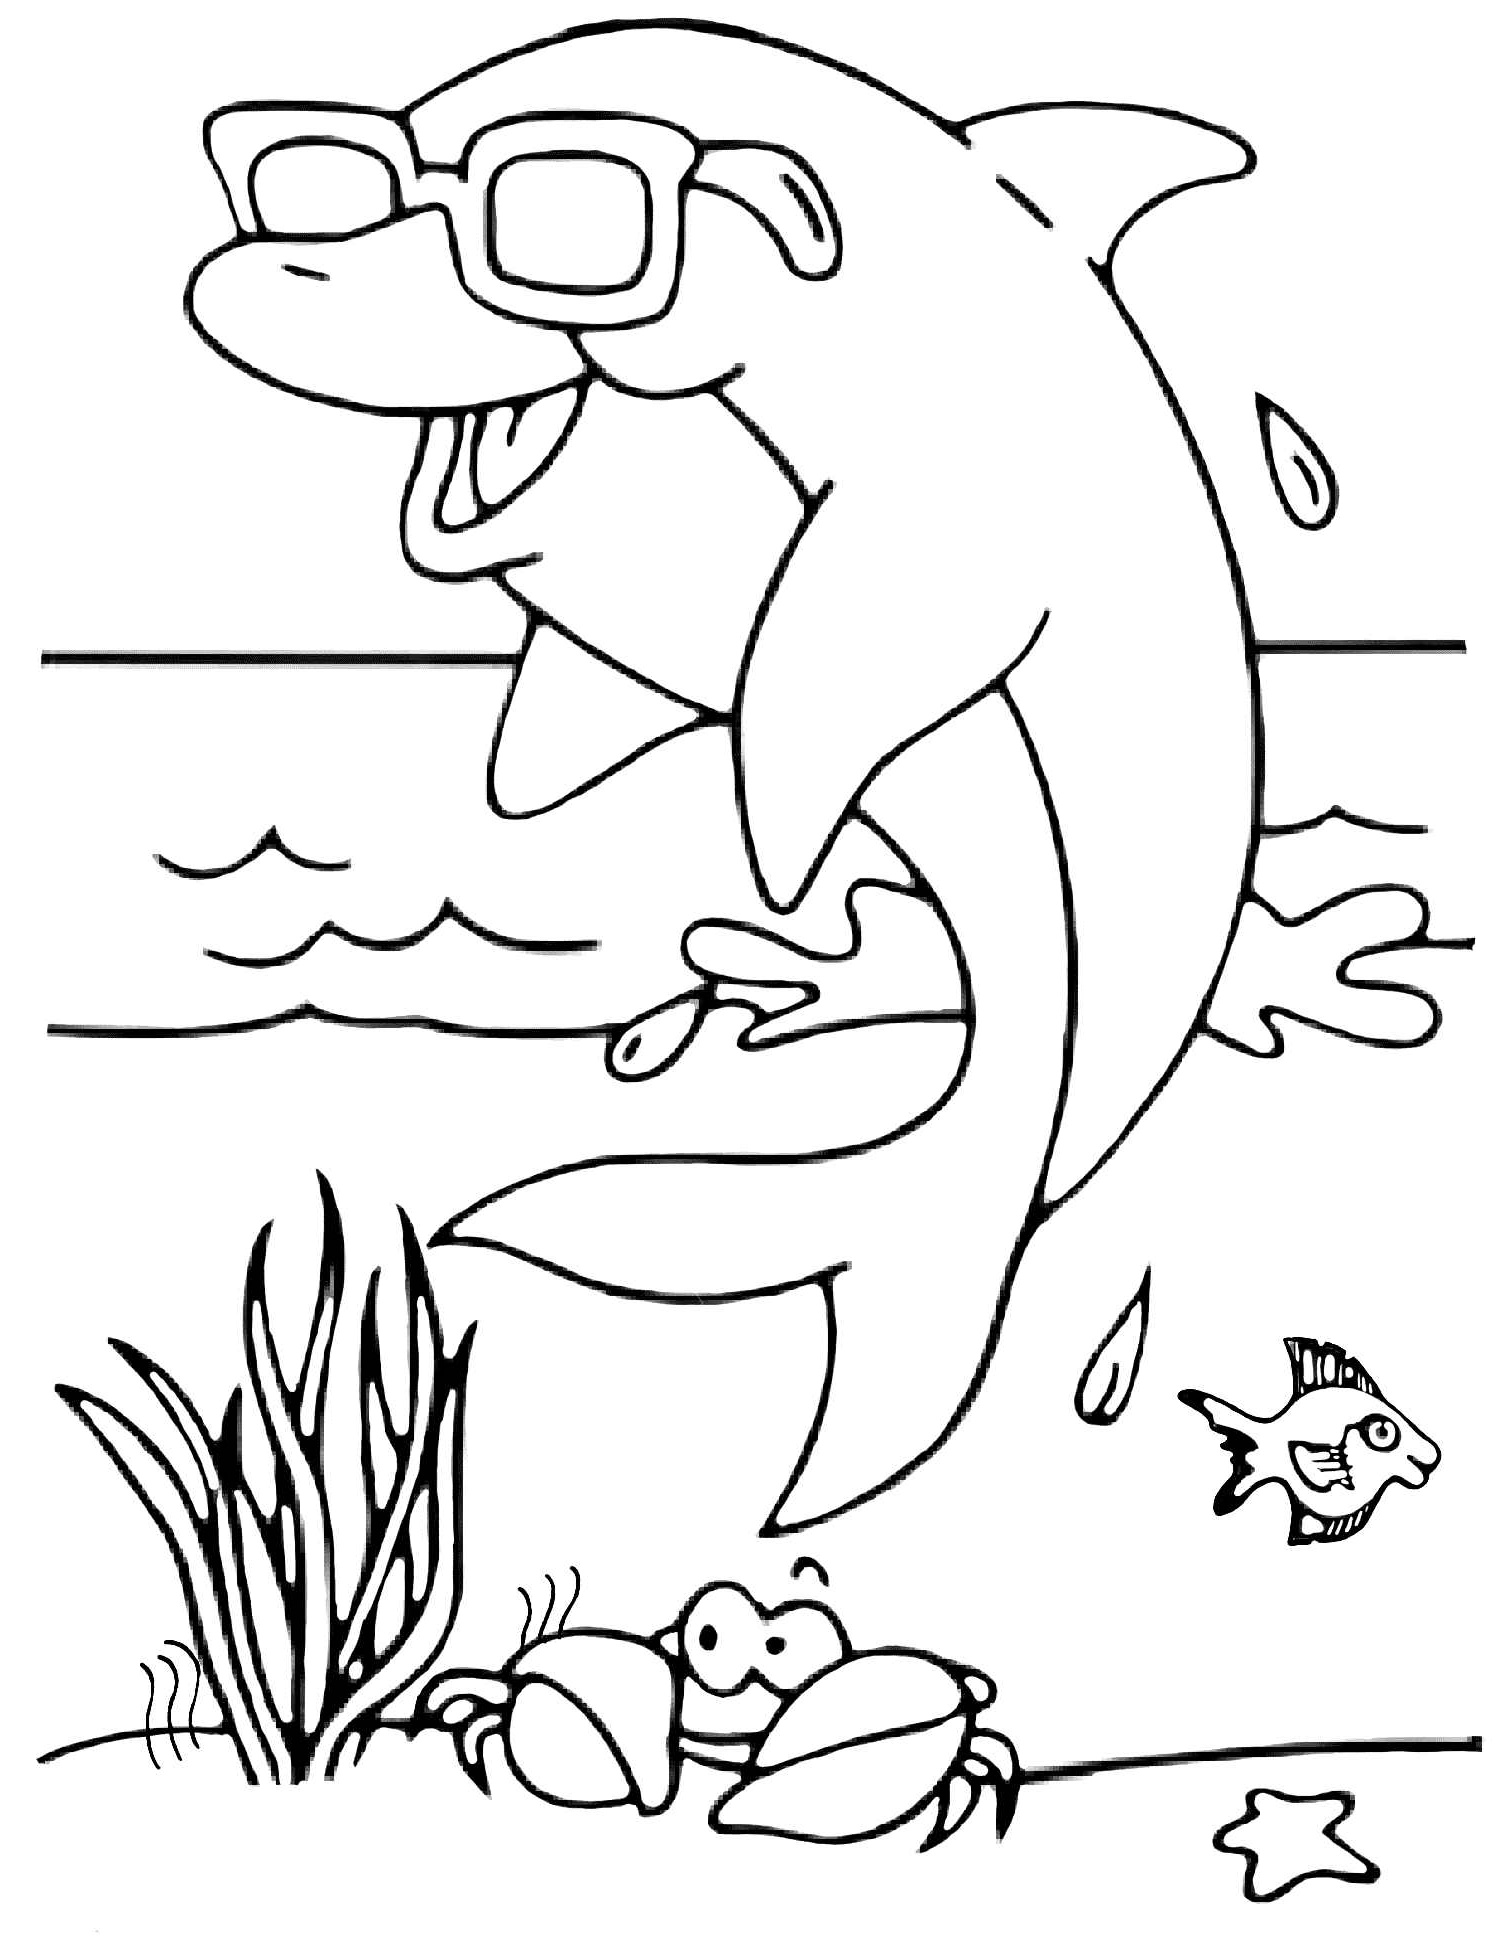 image=dauphins coloriage dauphin 7 1